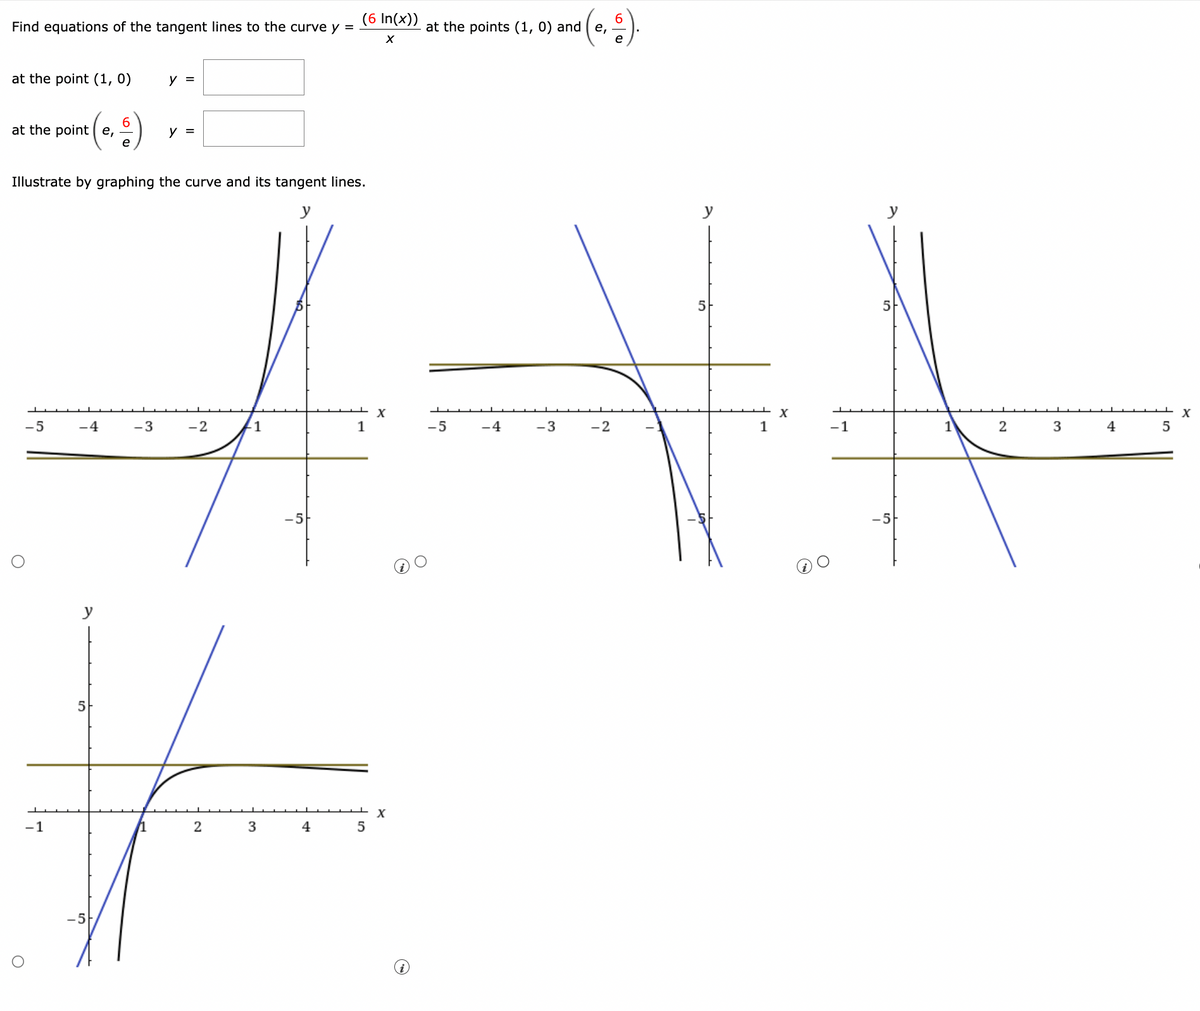 Find equations of the tangent lines to the curve y =
at the point (1, 0)
at the pointe,
O
O
-5
6
Illustrate by graphing the curve and its tangent lines.
y
-2
1
1
-5
4
V
— X
5
-1
1
2
3
4
-5H
-4
y =
-3
y =
(6 In(x))
X
X
6
at the points (1, 0) and ( e,
-5
-4
- 3
-2
5
1
X
-1
5
-5
1
2
3
4
5
X